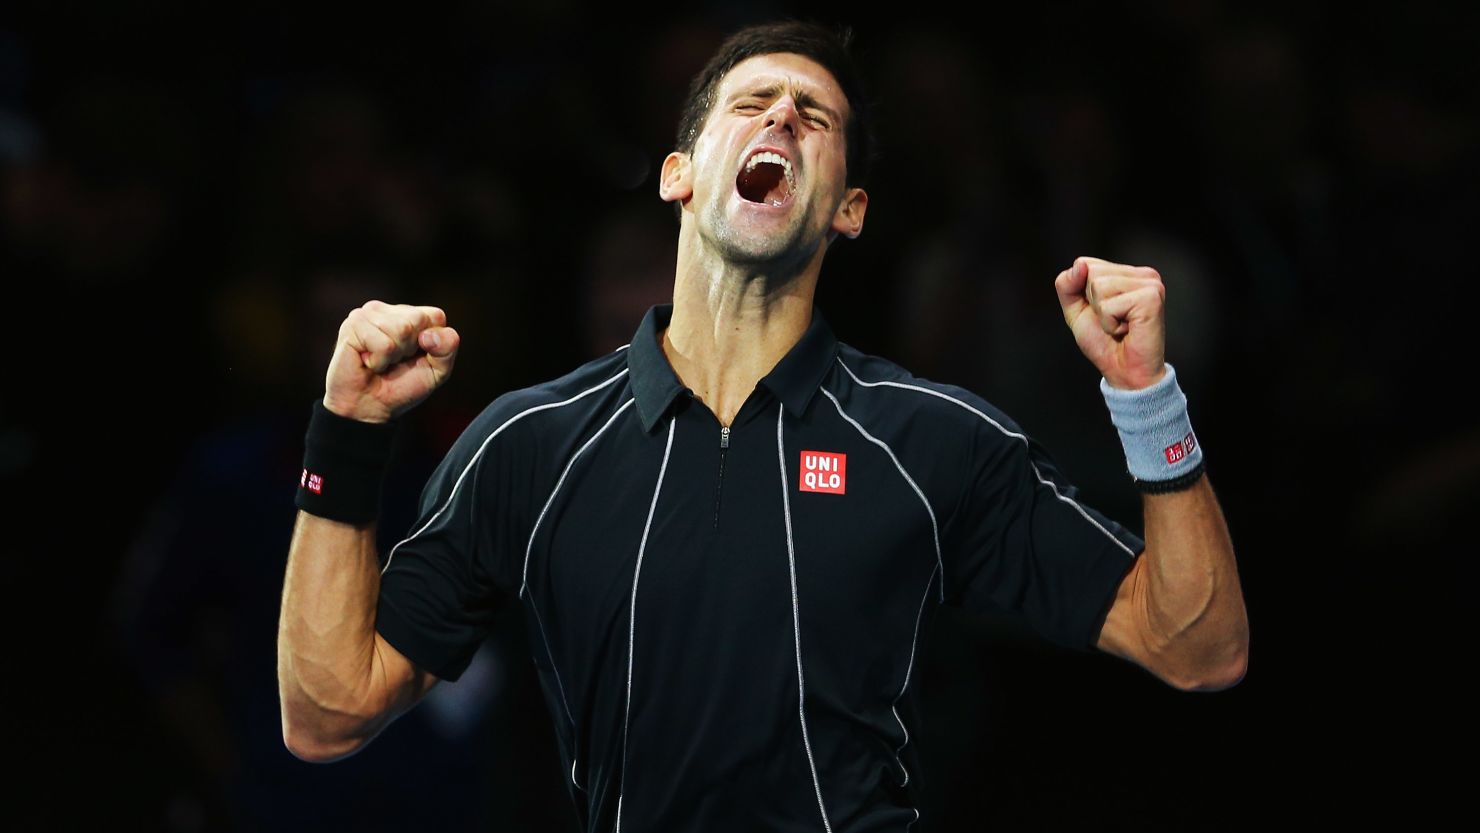 Novak Djokovic criticized anti-doping procedures after his compatriot Viktor Troicki was handed a 12-month ban from tennis.